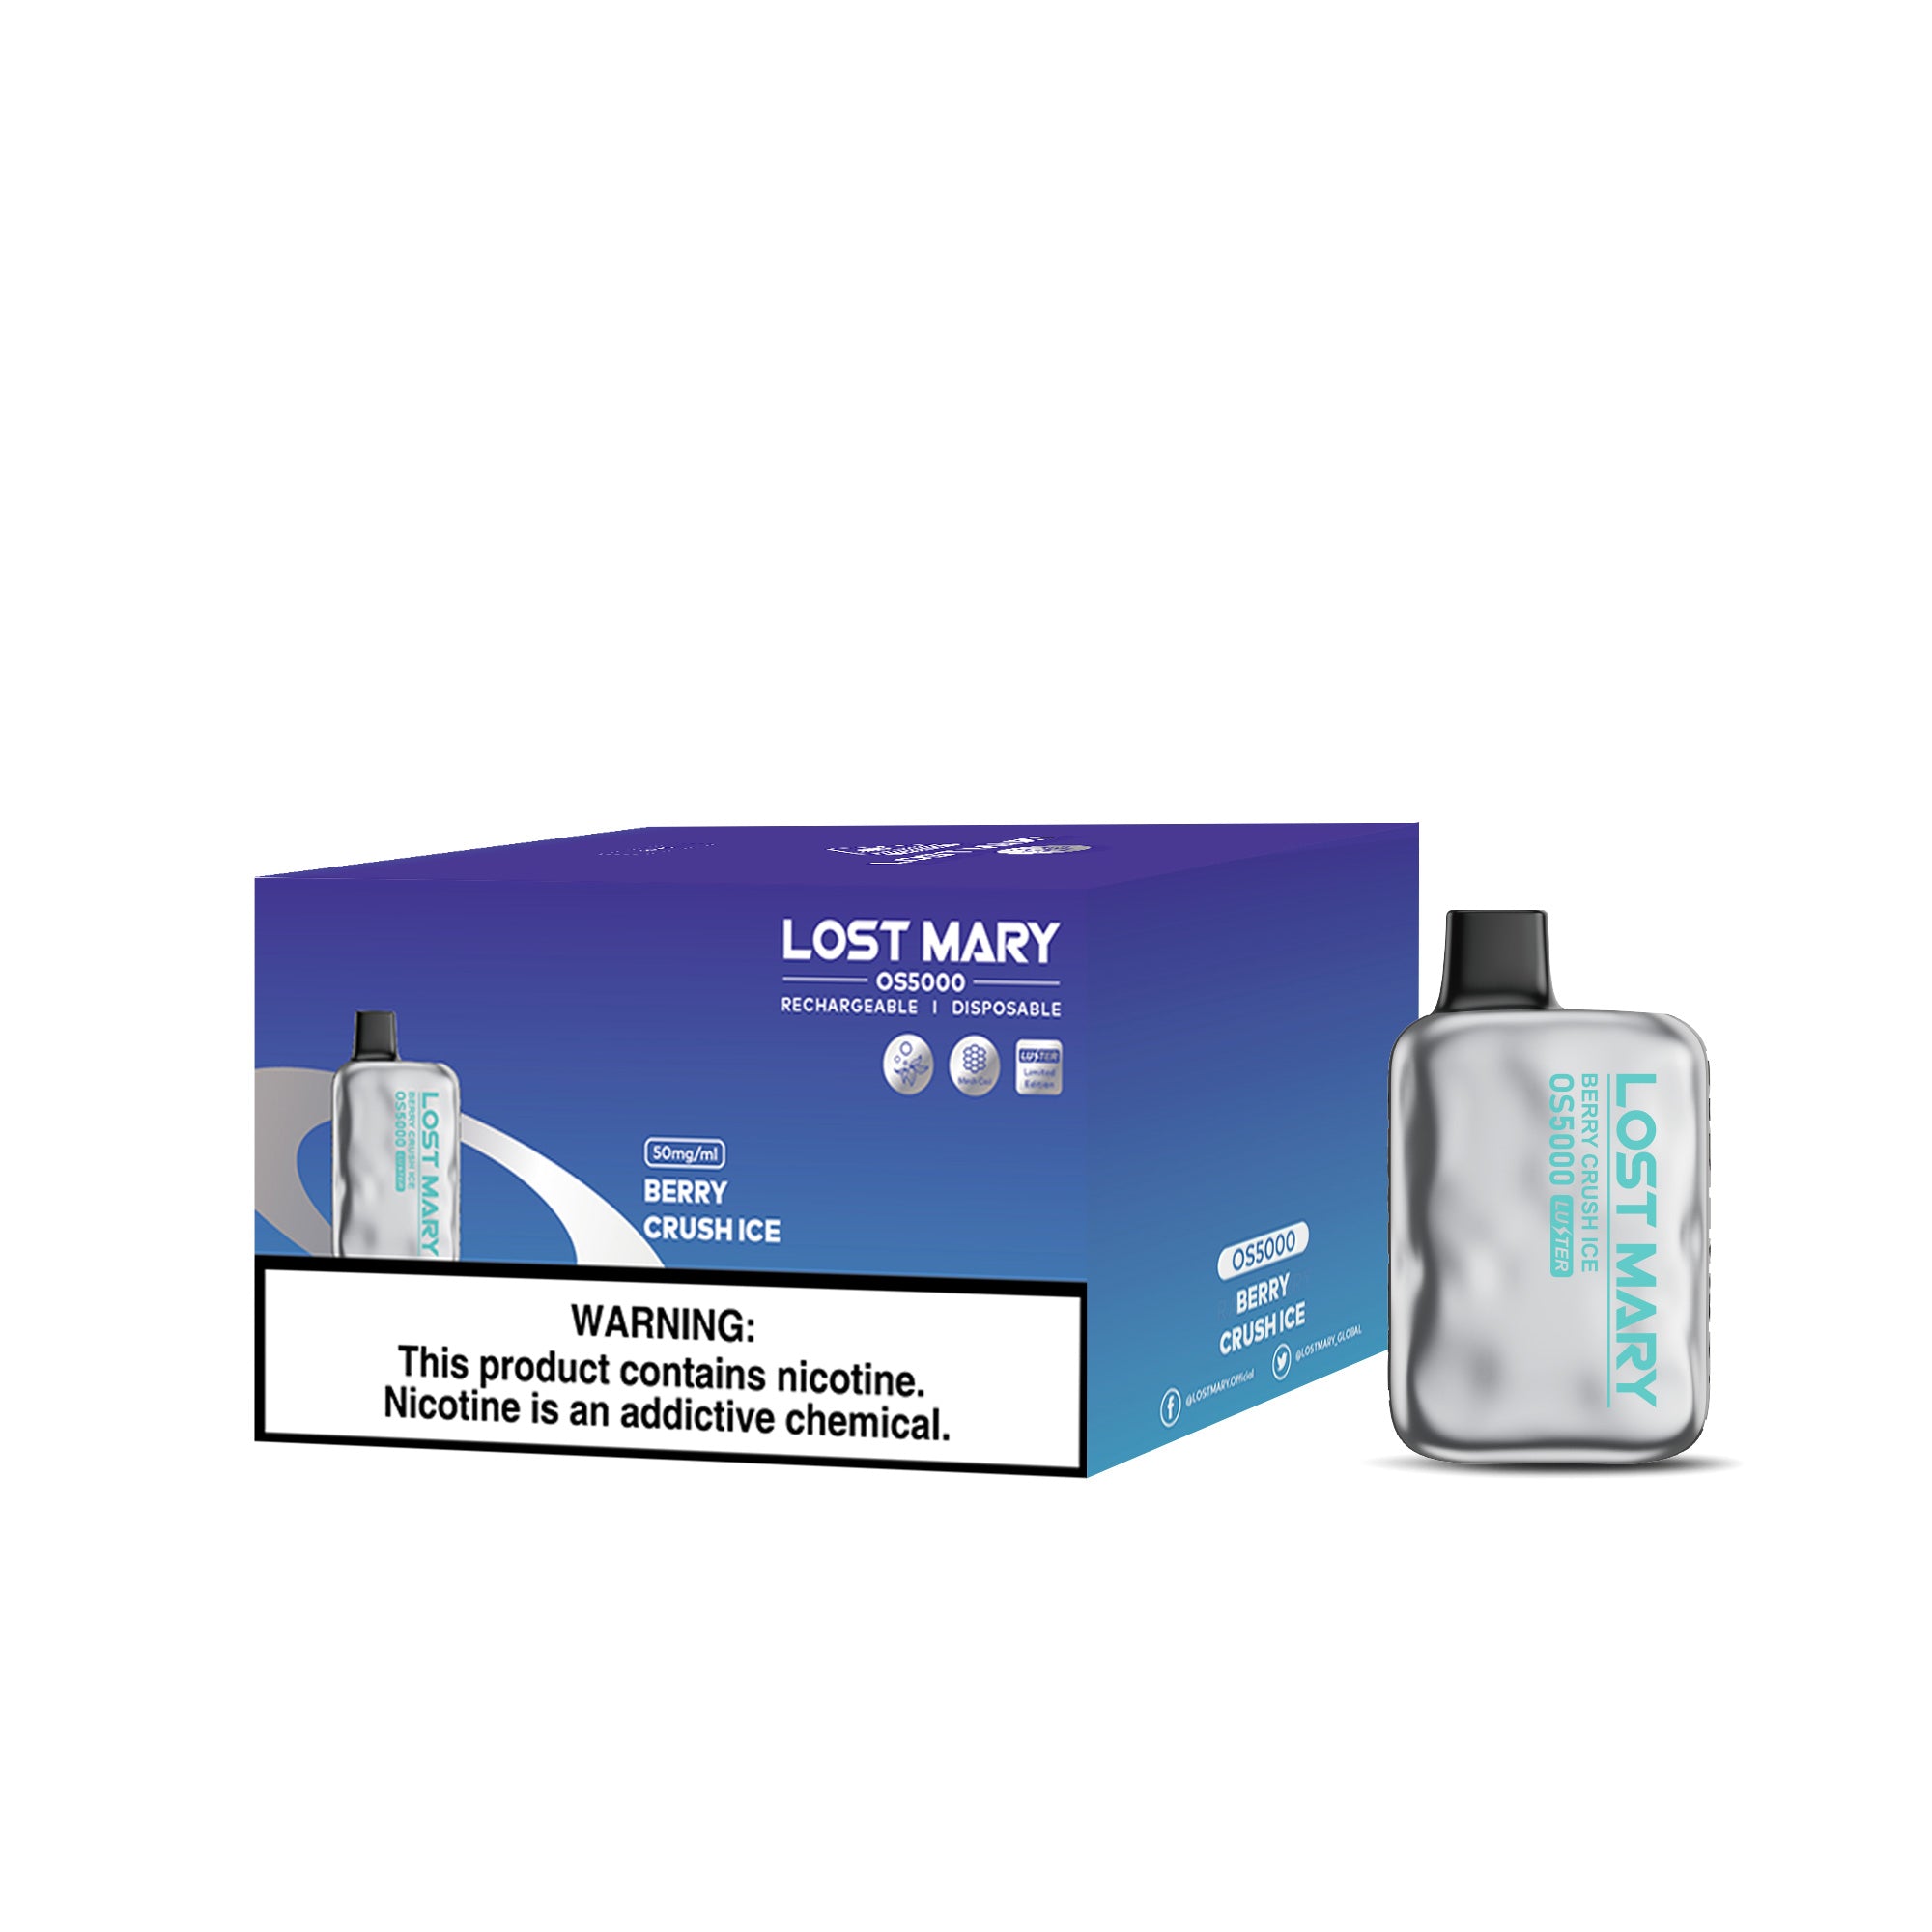 EB Lost Mary Luster OS5000 Puffs Rechargeable Disposable Vape Kit Wholesale - 1 Box / 10pcs